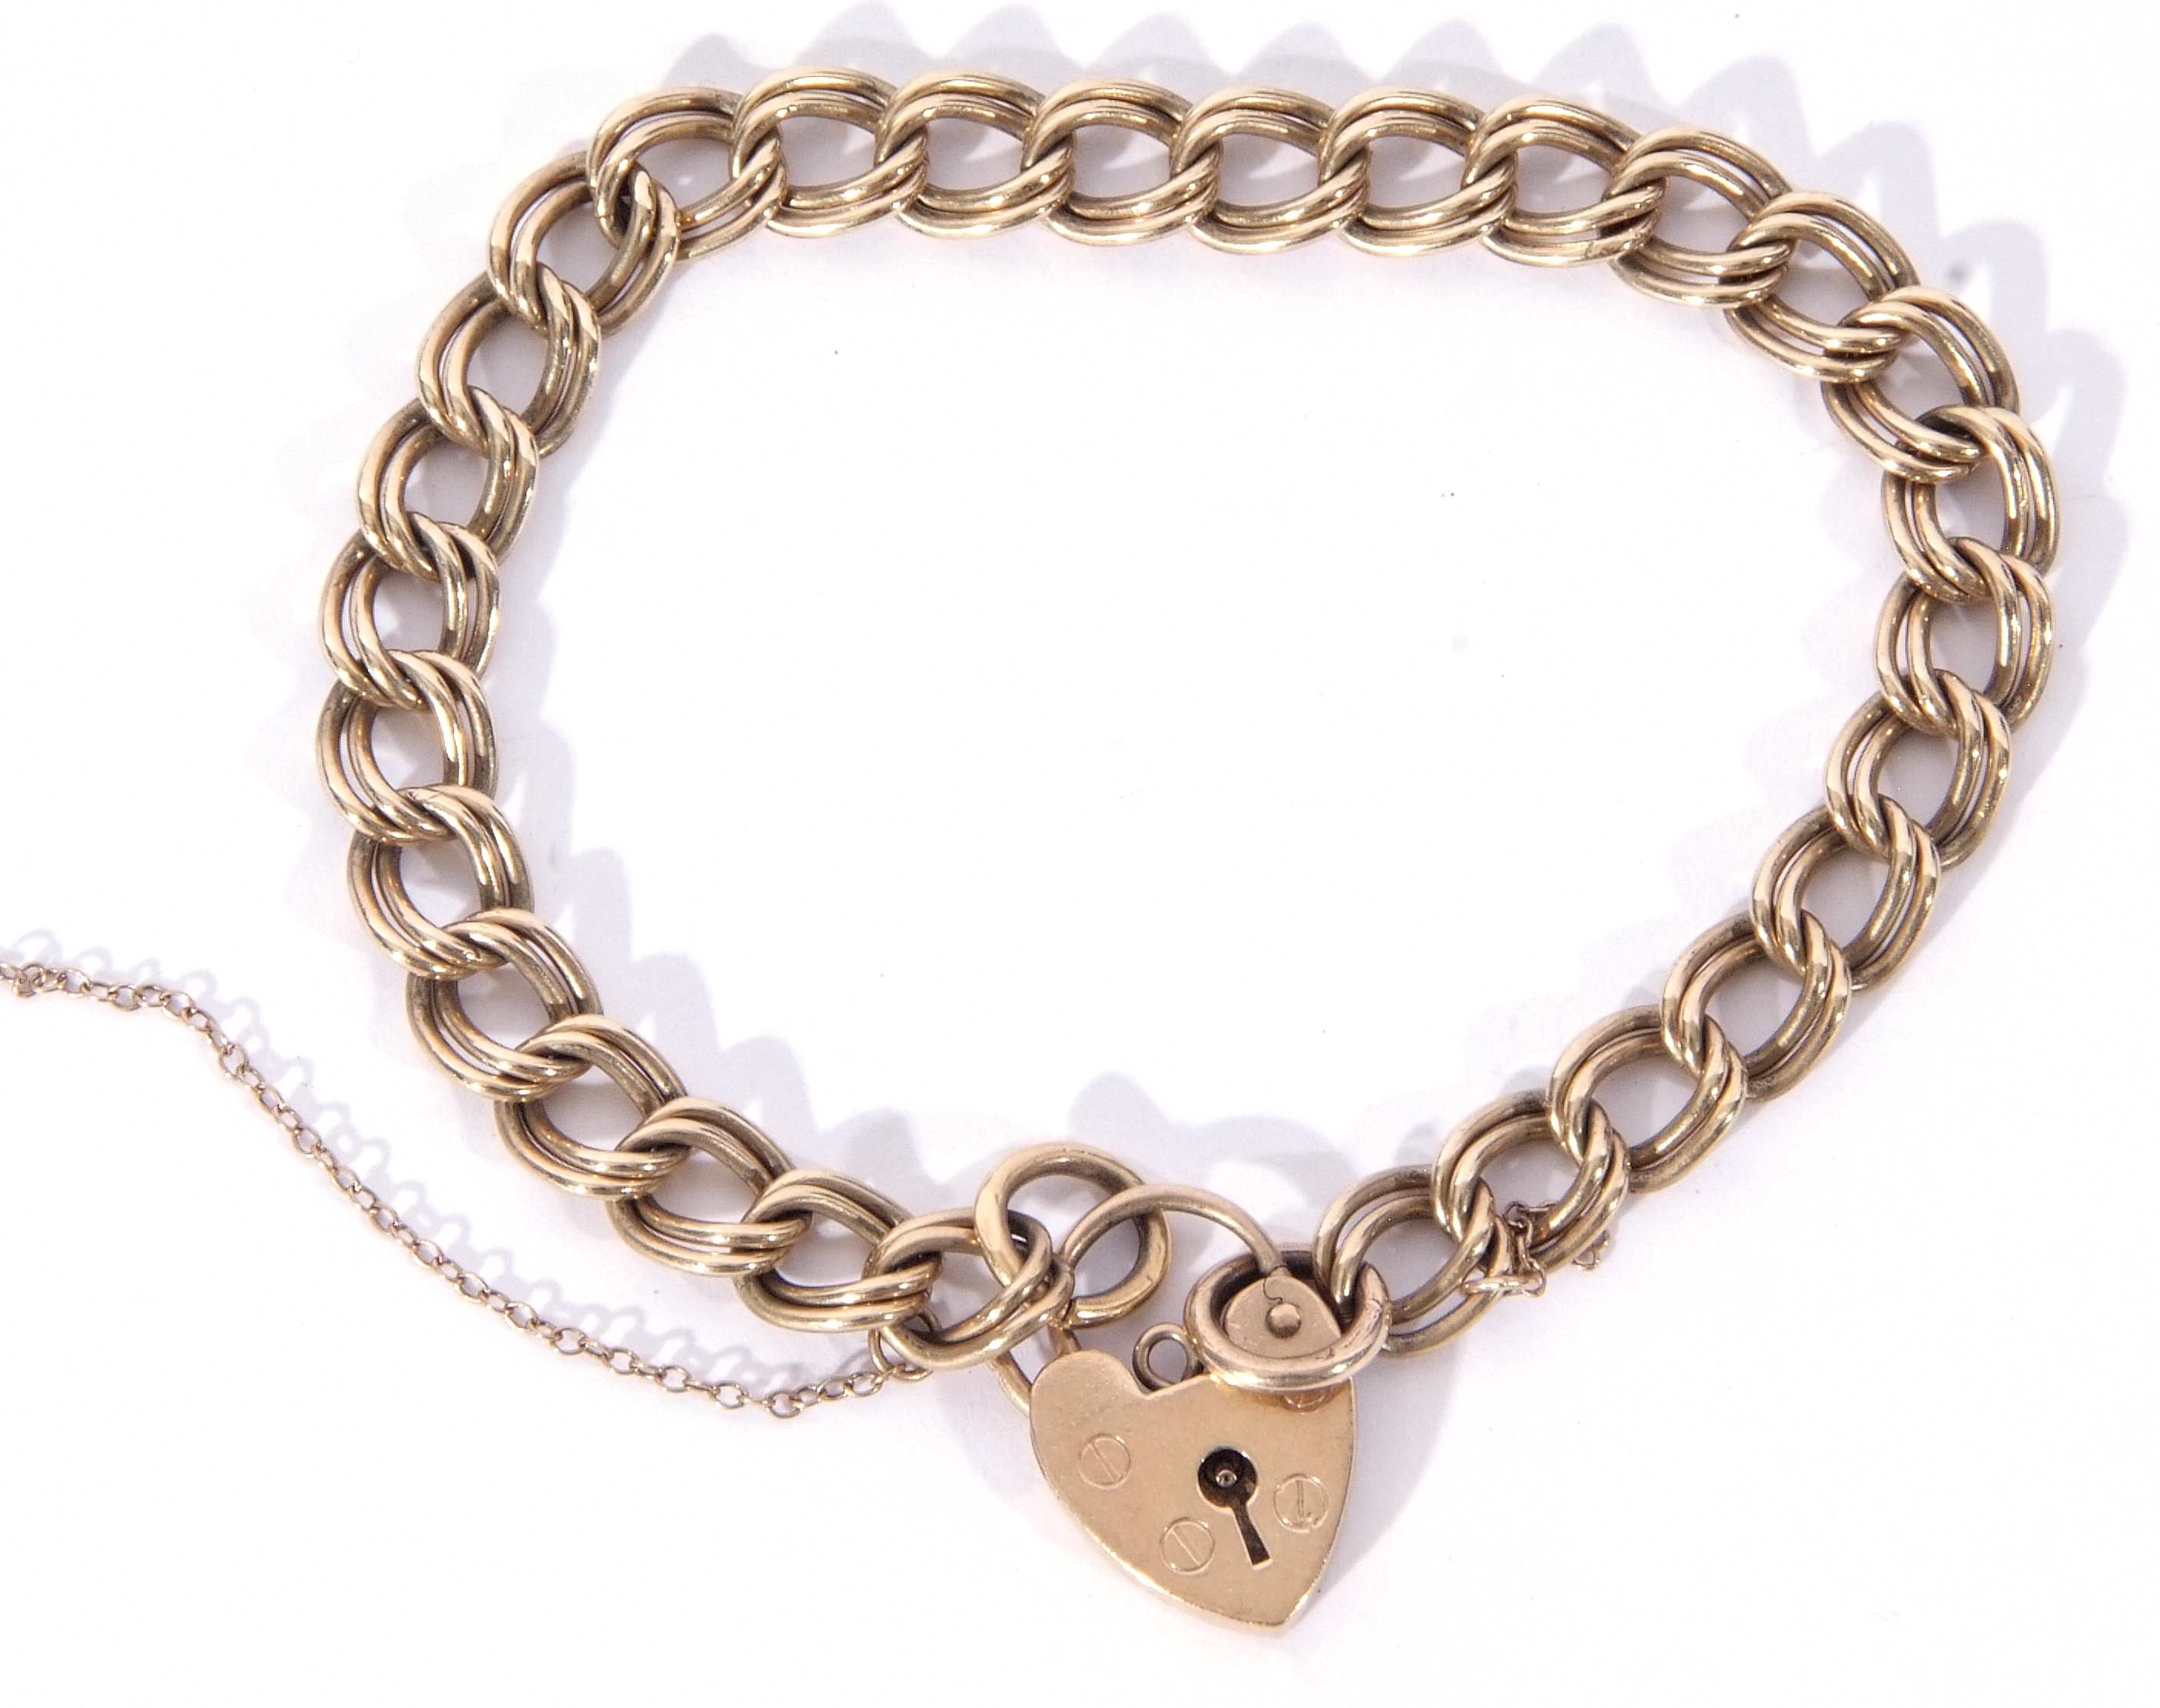 9ct gold bracelet, a design featuring double over links to a heart padlock, 19.5cm long, 12.5gms - Image 2 of 3